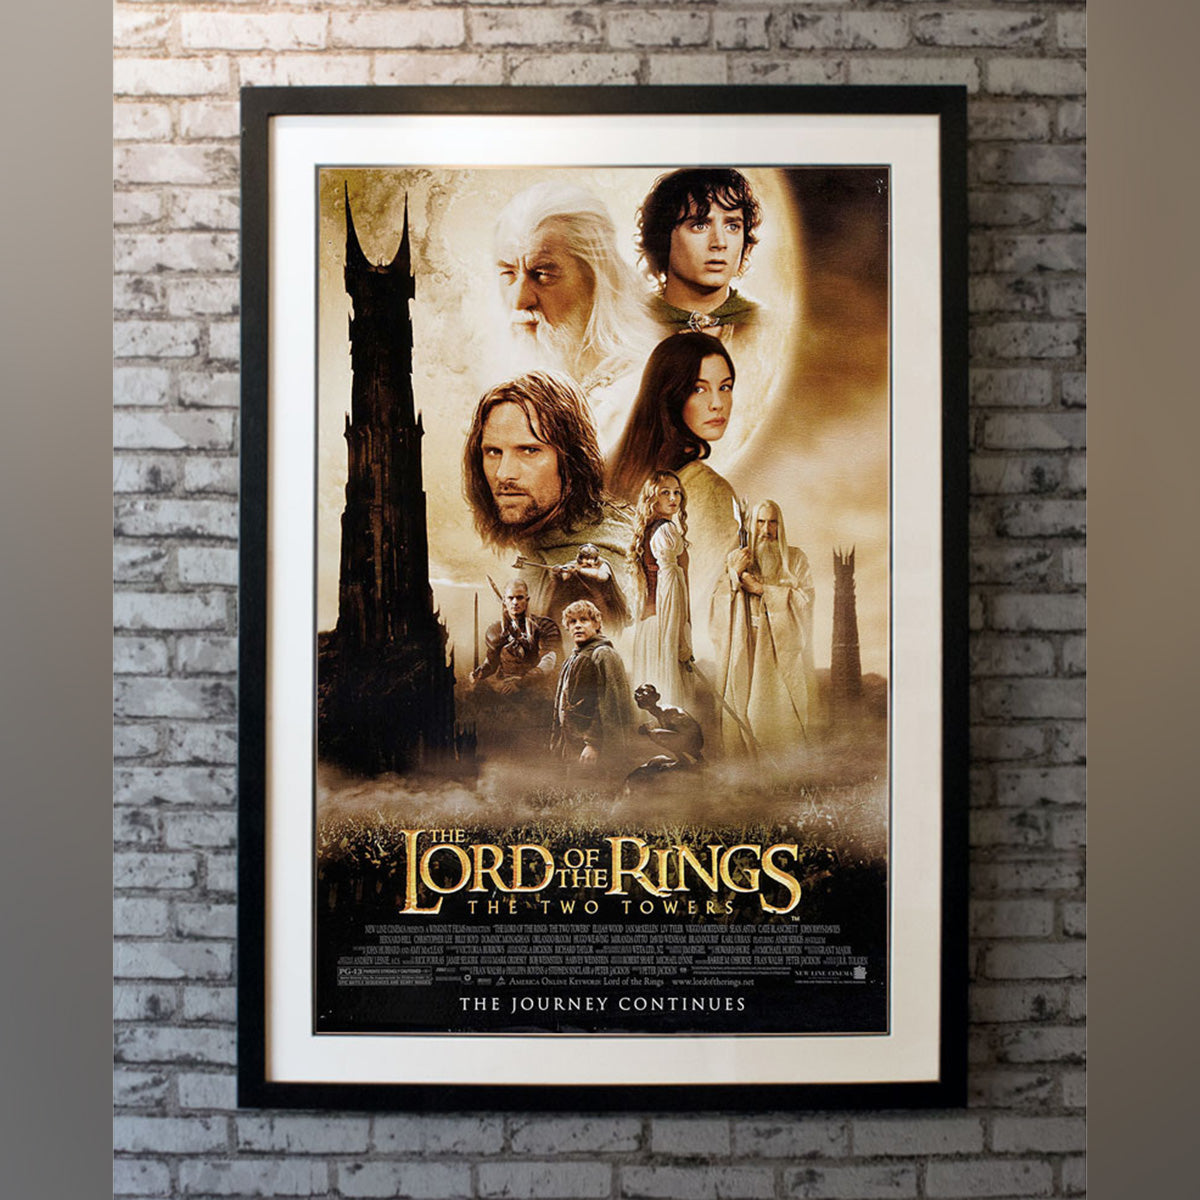 Original Movie Poster of Lord Of The Rings: The Two Towers (2002)